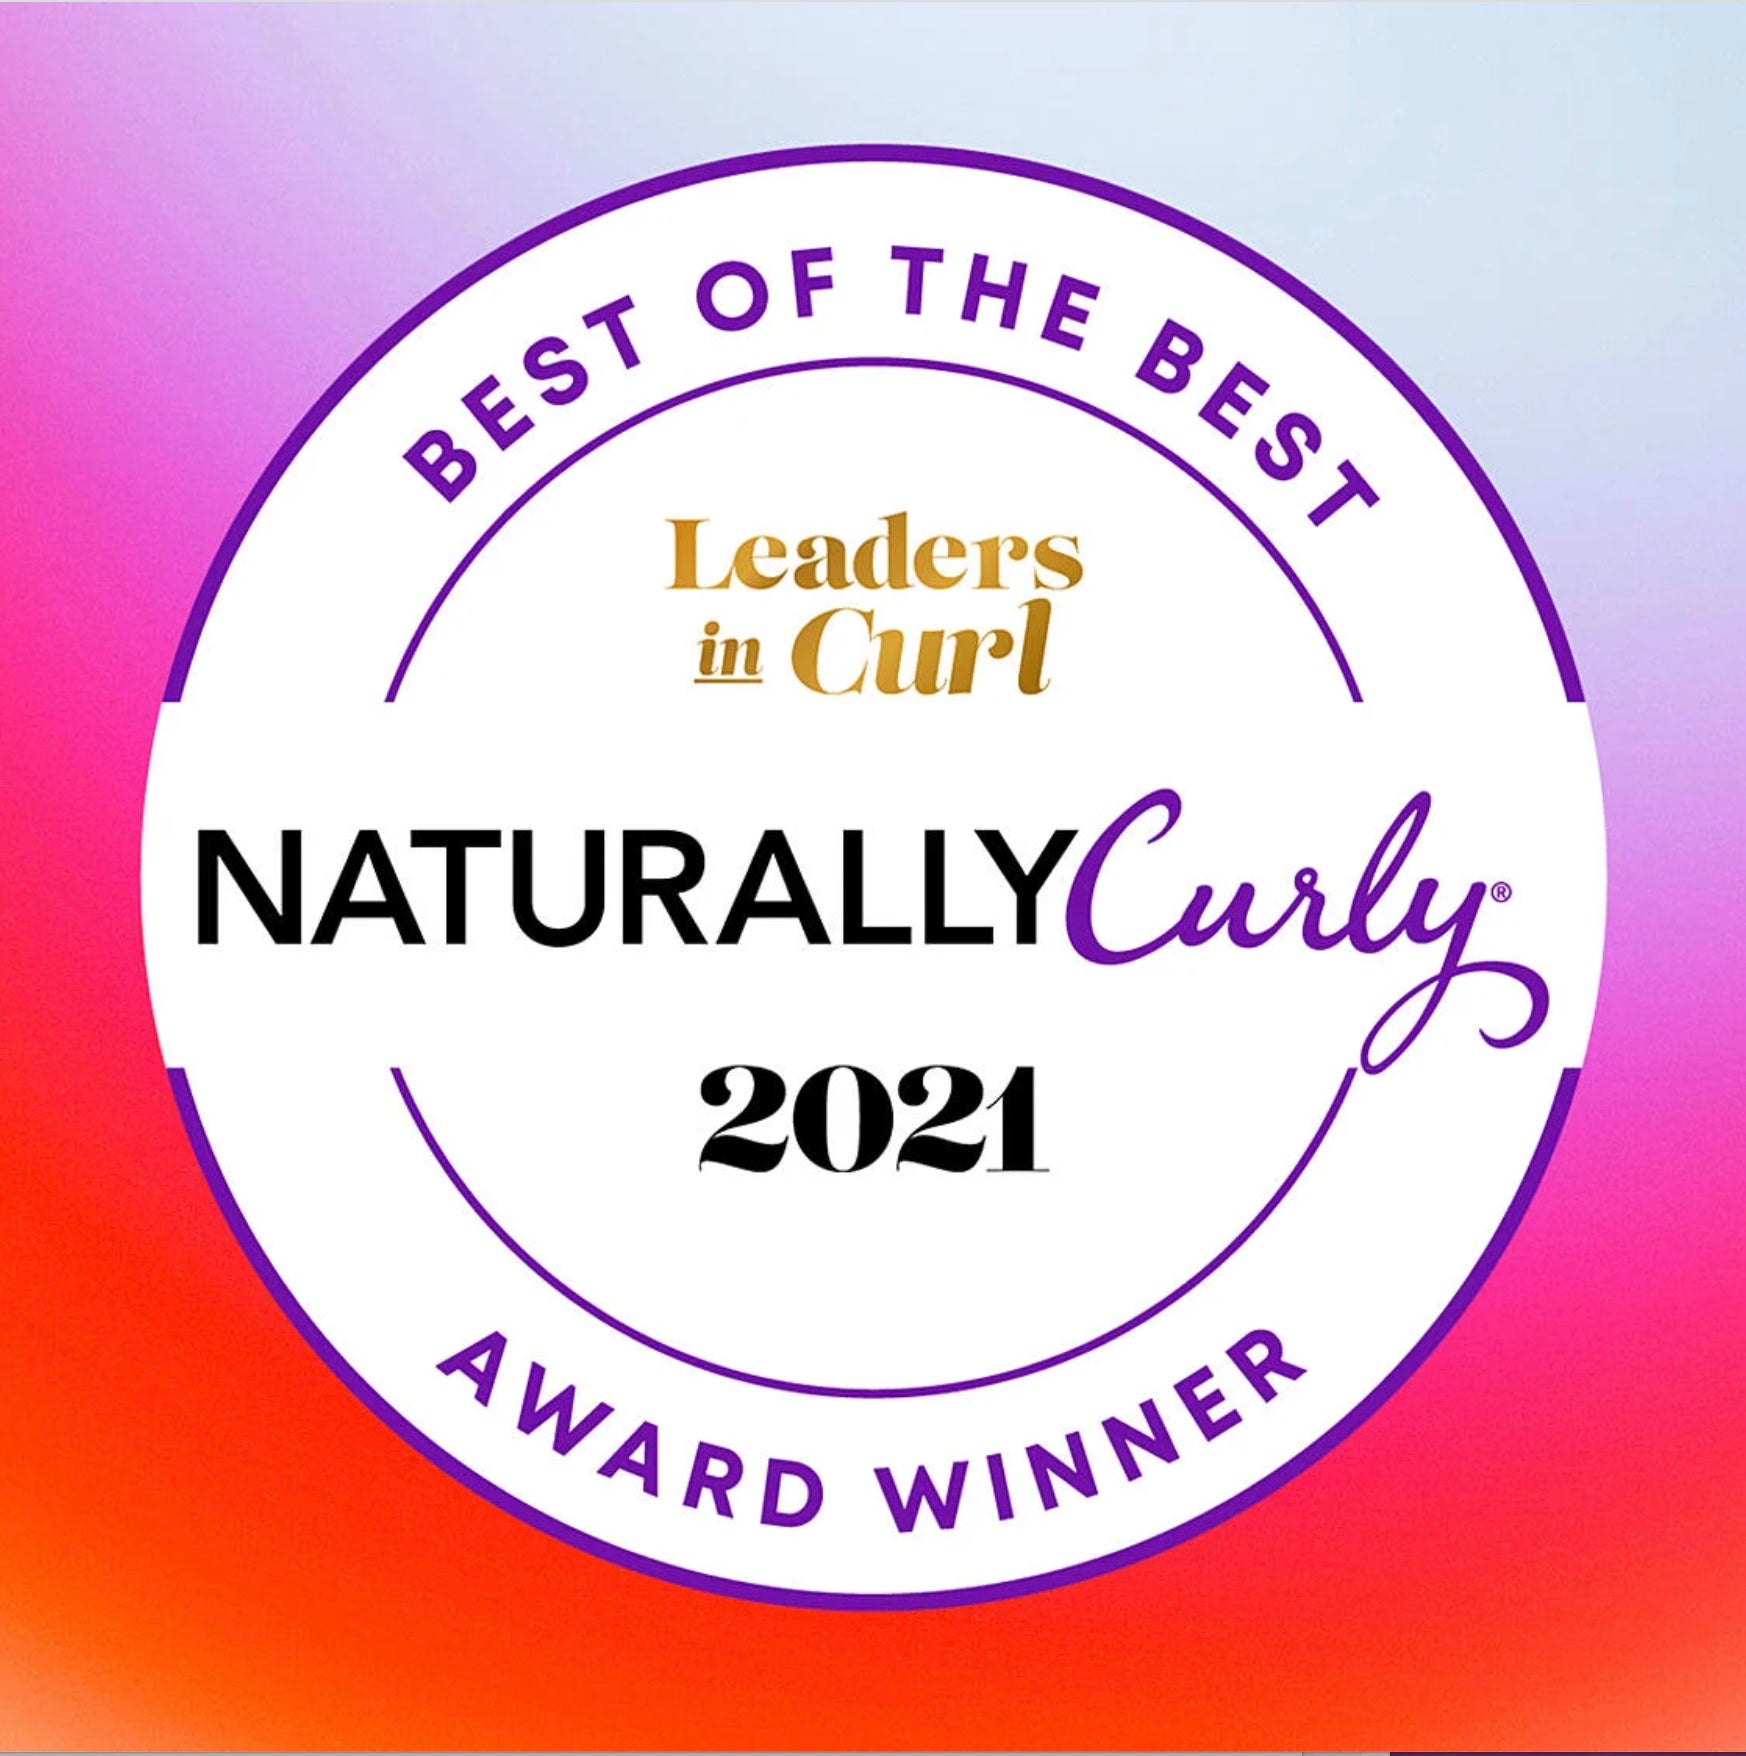 Naturally Curly Needs YOUR Vote For Best of the Best 2021!